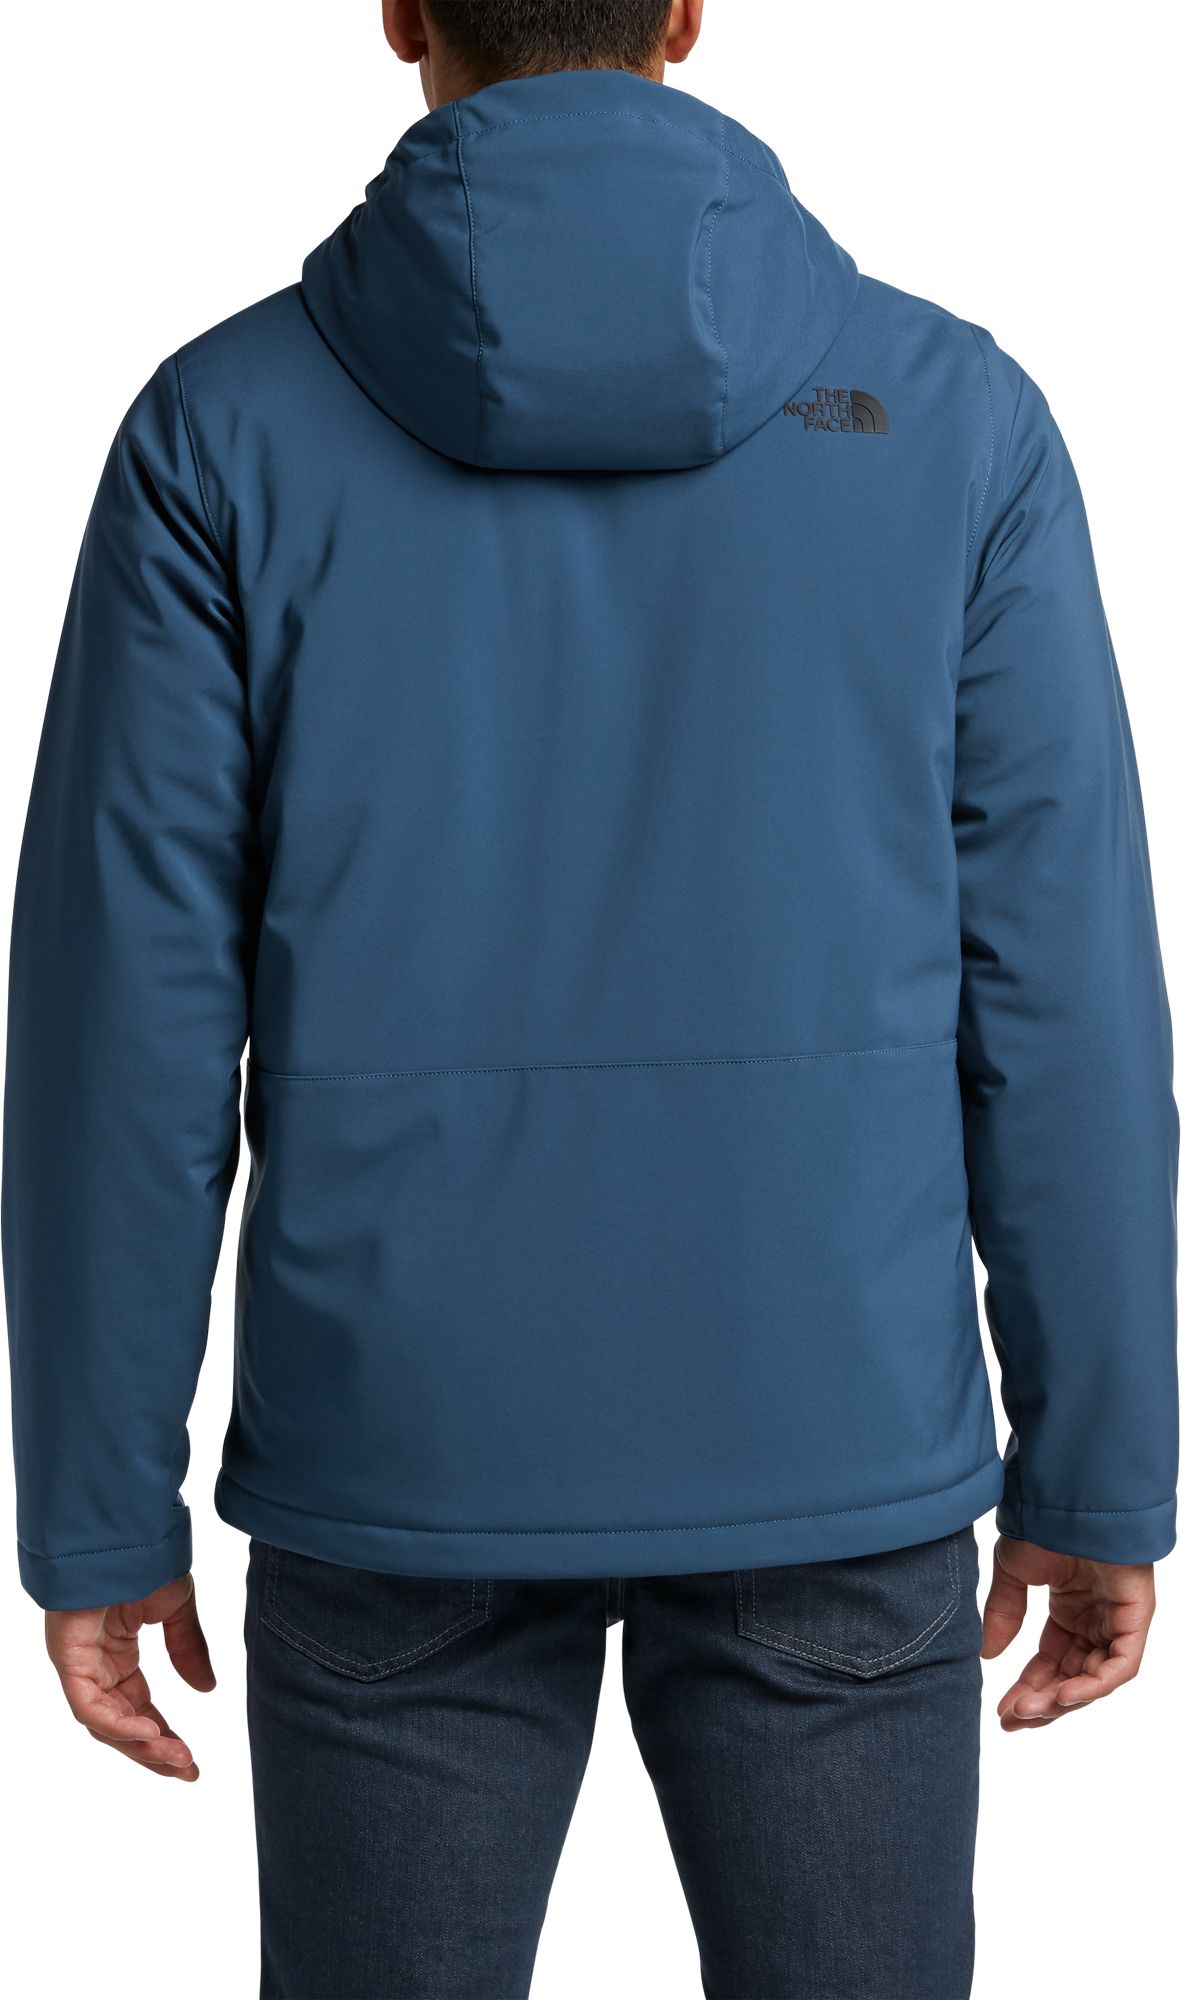 north face men's apex elevation insulated jacket